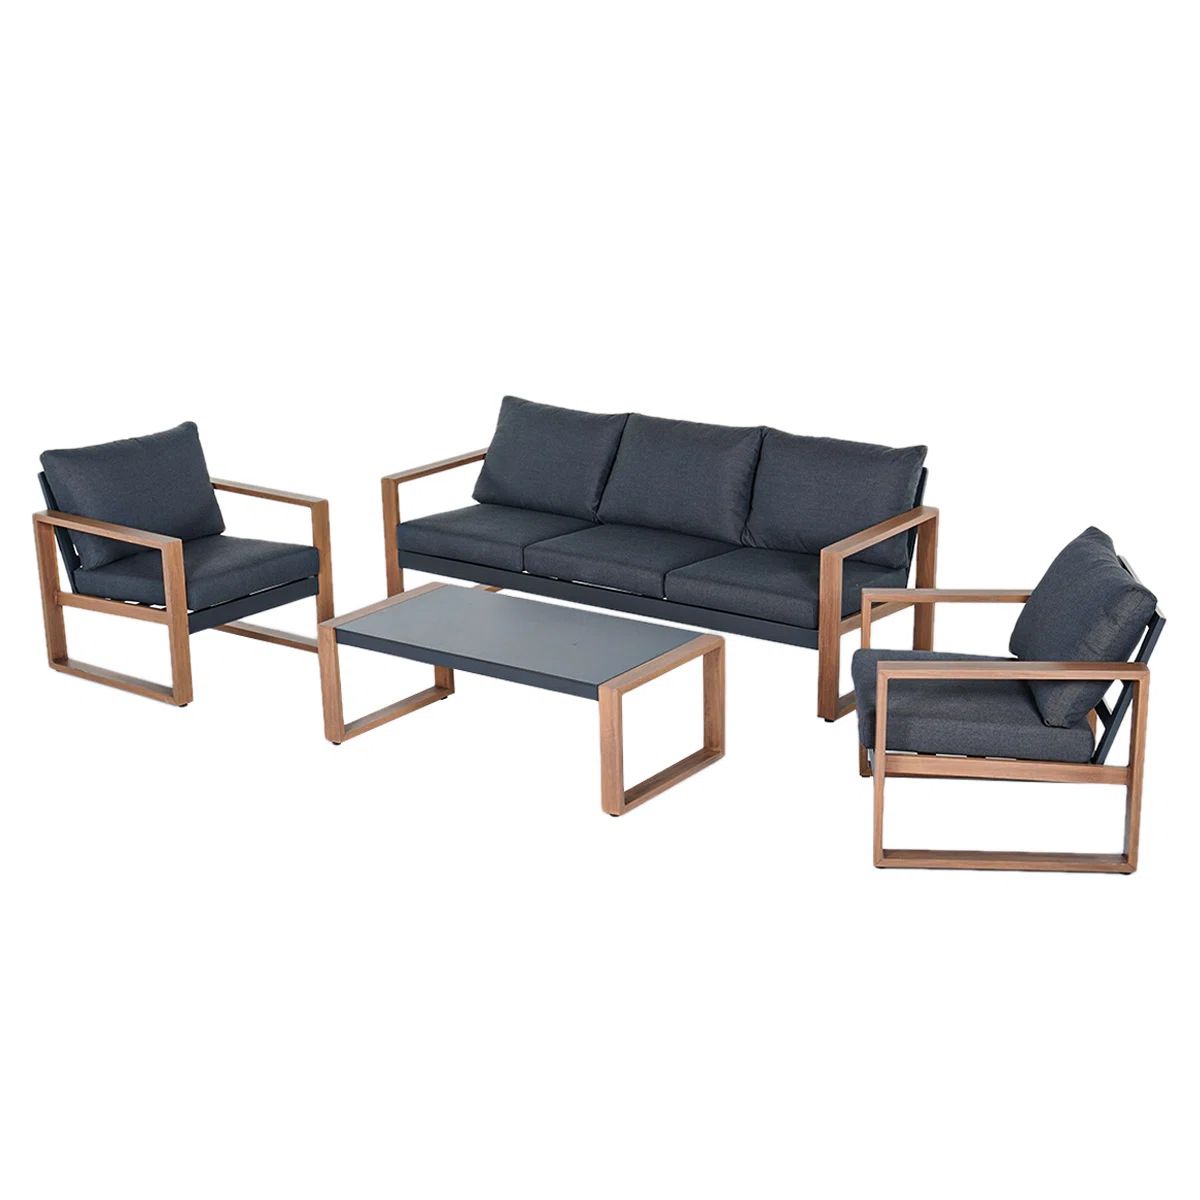 Arunas 5 - Person Outdoor Seating Group with Cushions | Wayfair North America